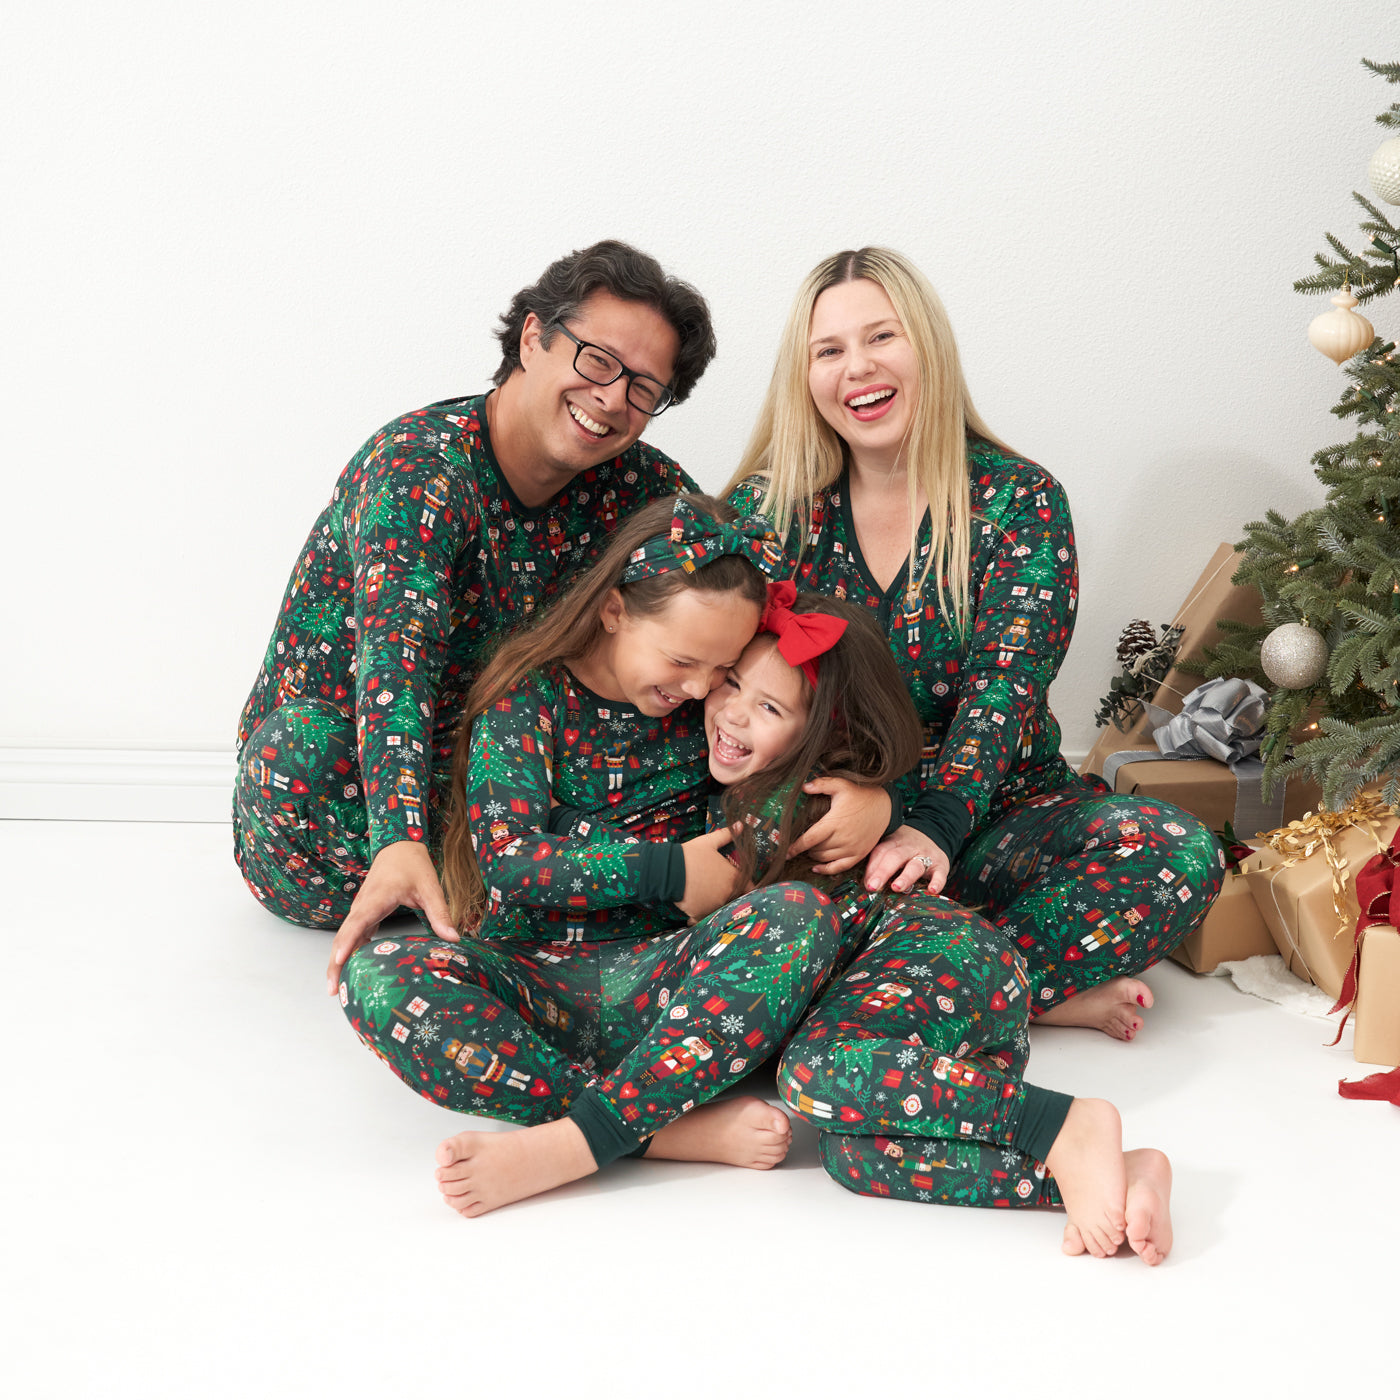 Family of four posing wearing Night at the Nutcracker pajama sets. Dad is wearing a Men's Night at the Nutcracker printed men's pajama top and men's pajama bottoms. Mom is wearing a women's Night at the Nutcracker women's pajama top and matching pajama bottoms. The older daughter is wearing a two piece Night at the Nutcracker two piece pajama set paired with a matching luxe bow headband. Their youngest child is wearing a Night at the Nutcracker printed zippy paired with a Holiday Red luxe bow headband